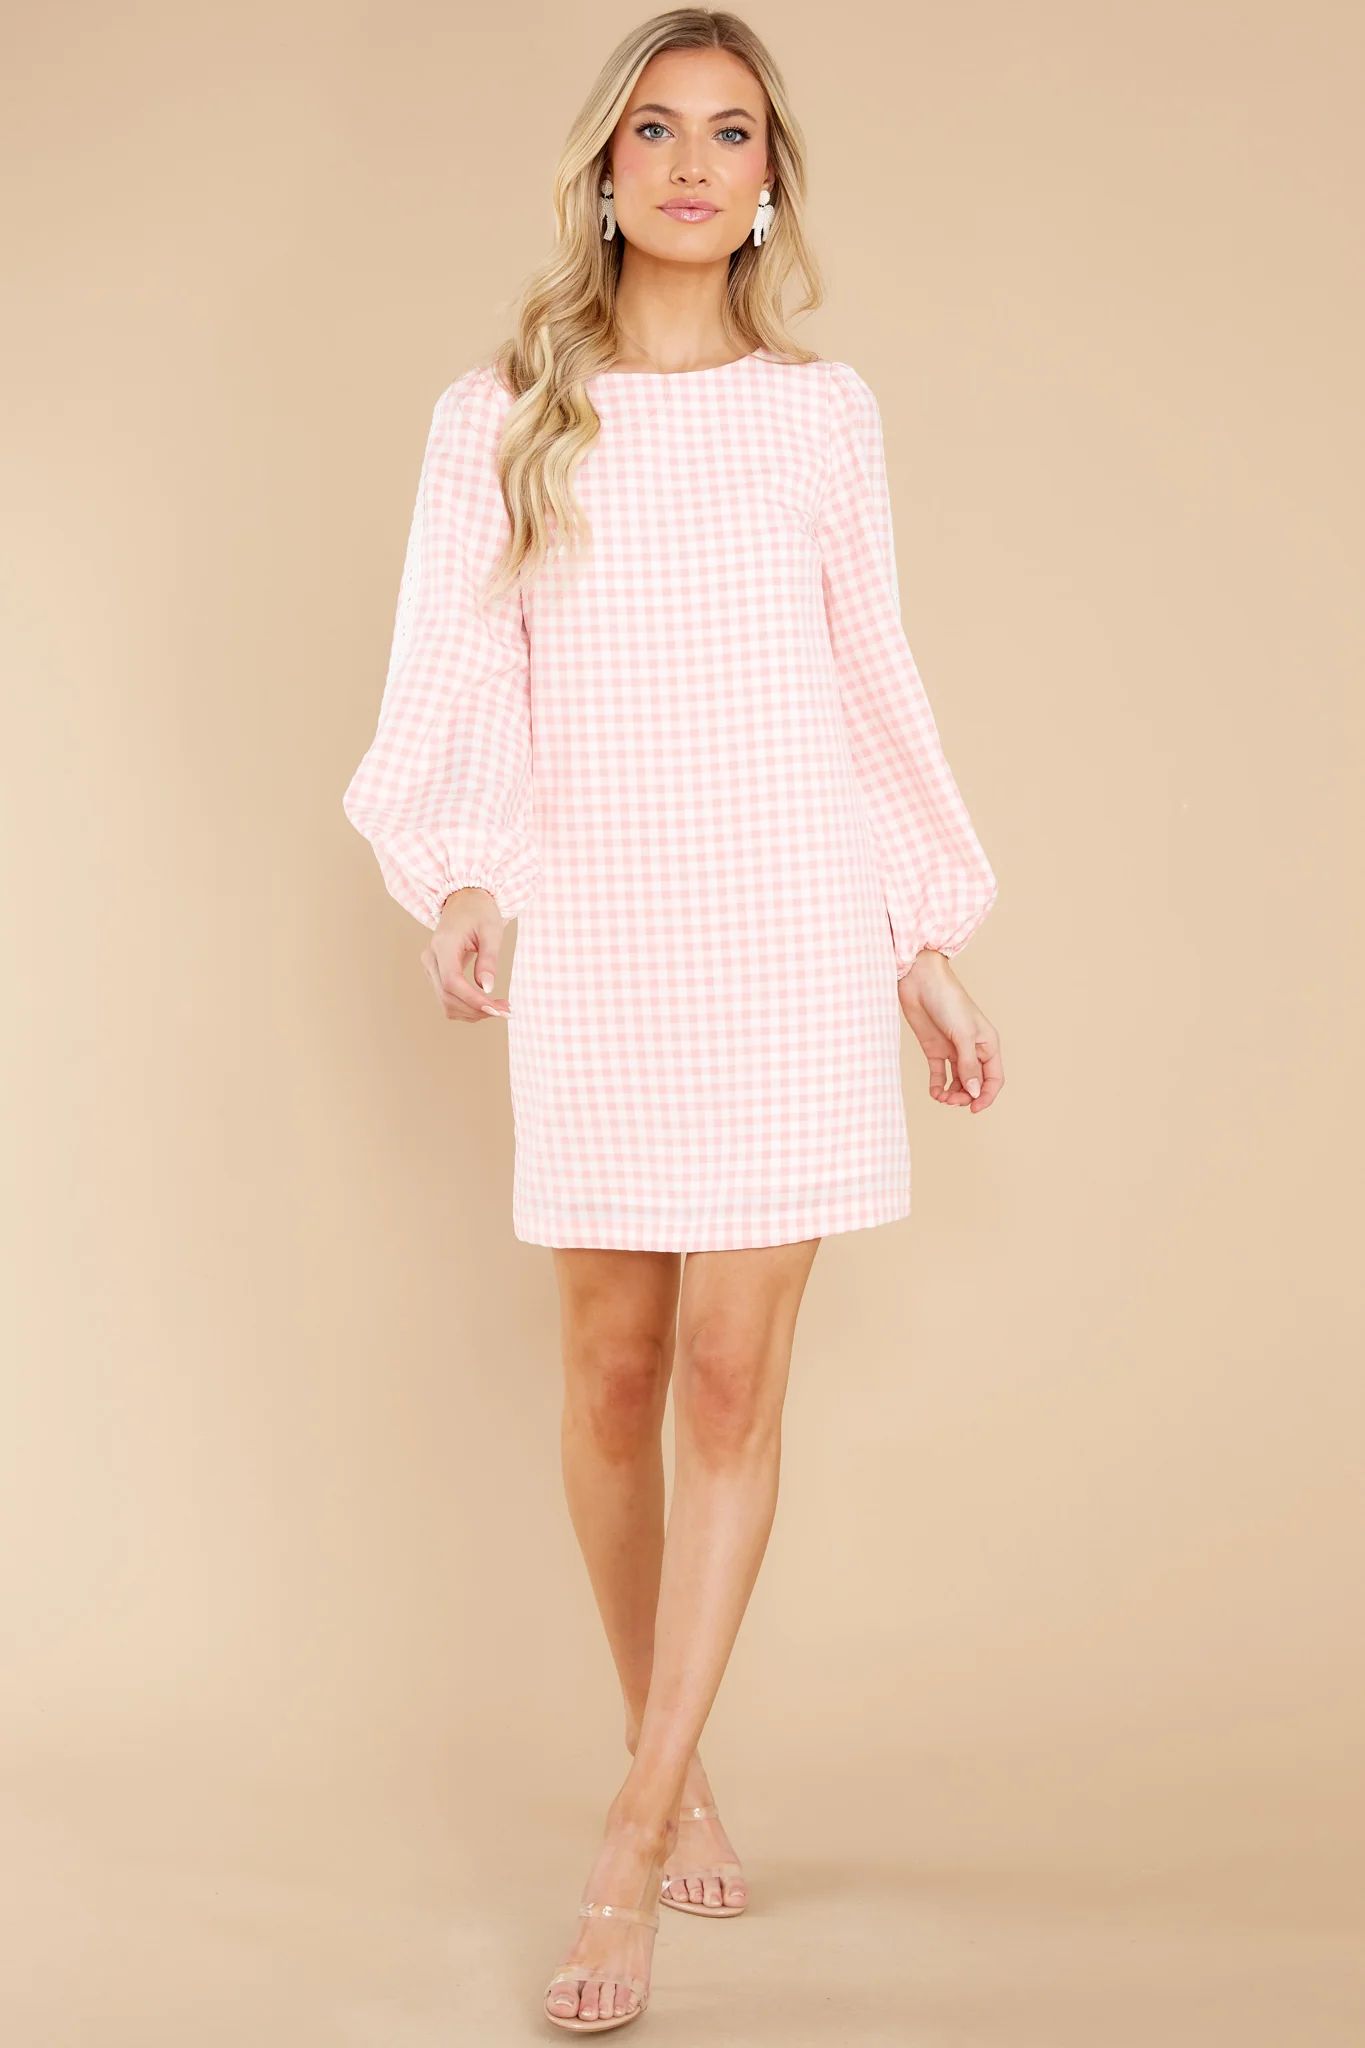 Carefreely Content Pink Gingham Mini Dress | Red Dress 